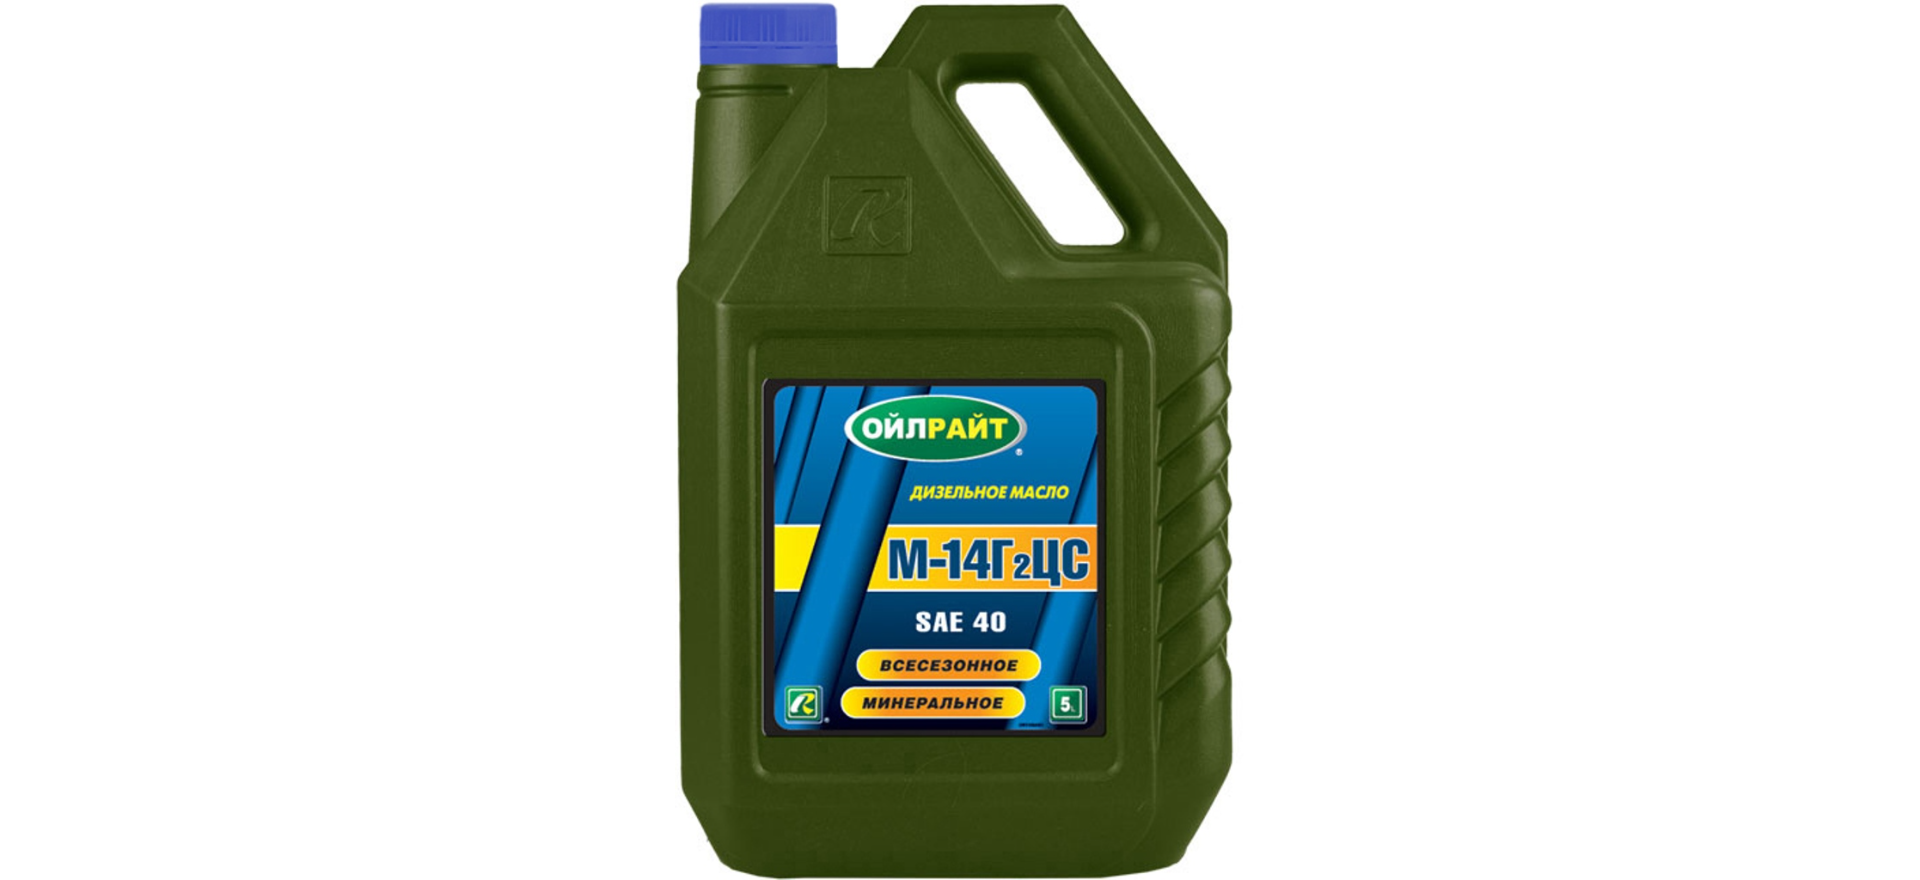 Масло марки л. Масло моторное м10дм Oil right 10л. Масло OILRIGHT моторное м10 дм дизель 10л. Devon м-10дм SAE 30. Моторное масло OILRIGHT М-8дм 30 л.